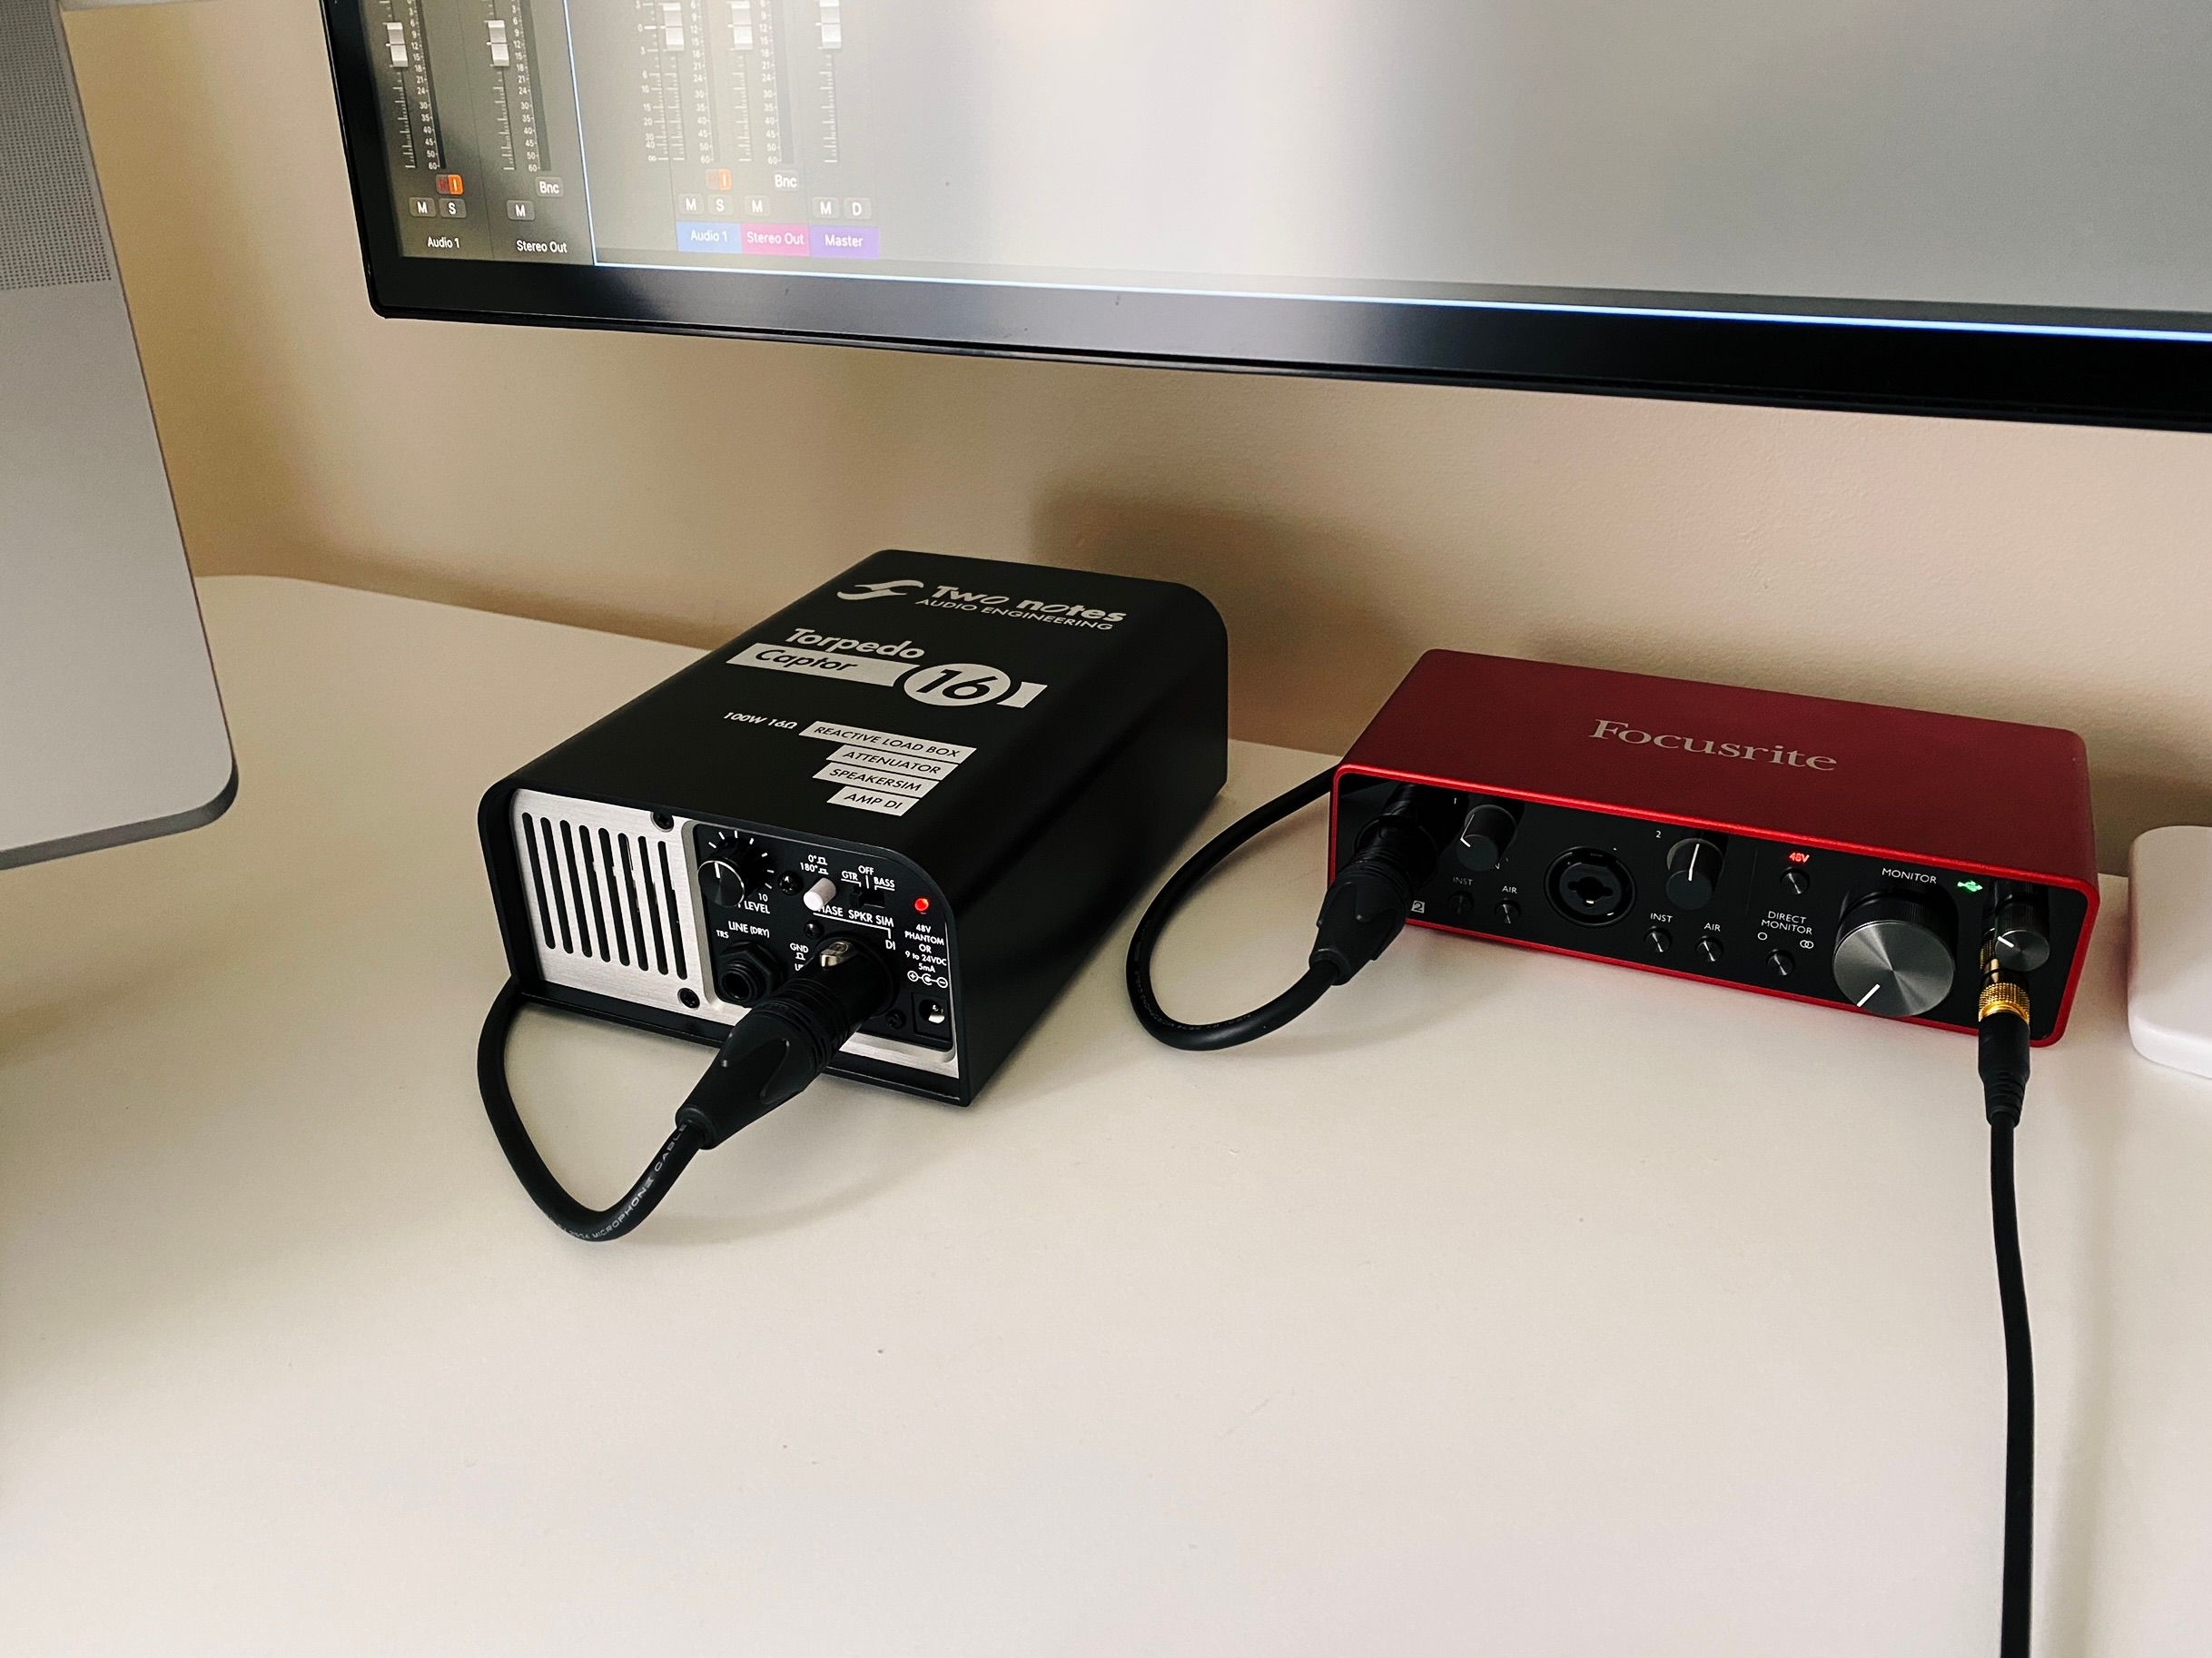 A photo of a Two Notes brand "Torpedo Captor" guitar load box. It's a big chunky black box with dials and switches on the front-right, and a fan intake grill on the front-left. There's a CHONKY-looking XLR cable coming out of it and going into the red Focusrite Scarlett 2i2 USB audio interface next to it, the top and sides of which are a rich deep red metallic colour, and on the front is shiny black with all sorts of dials and sockets on it.